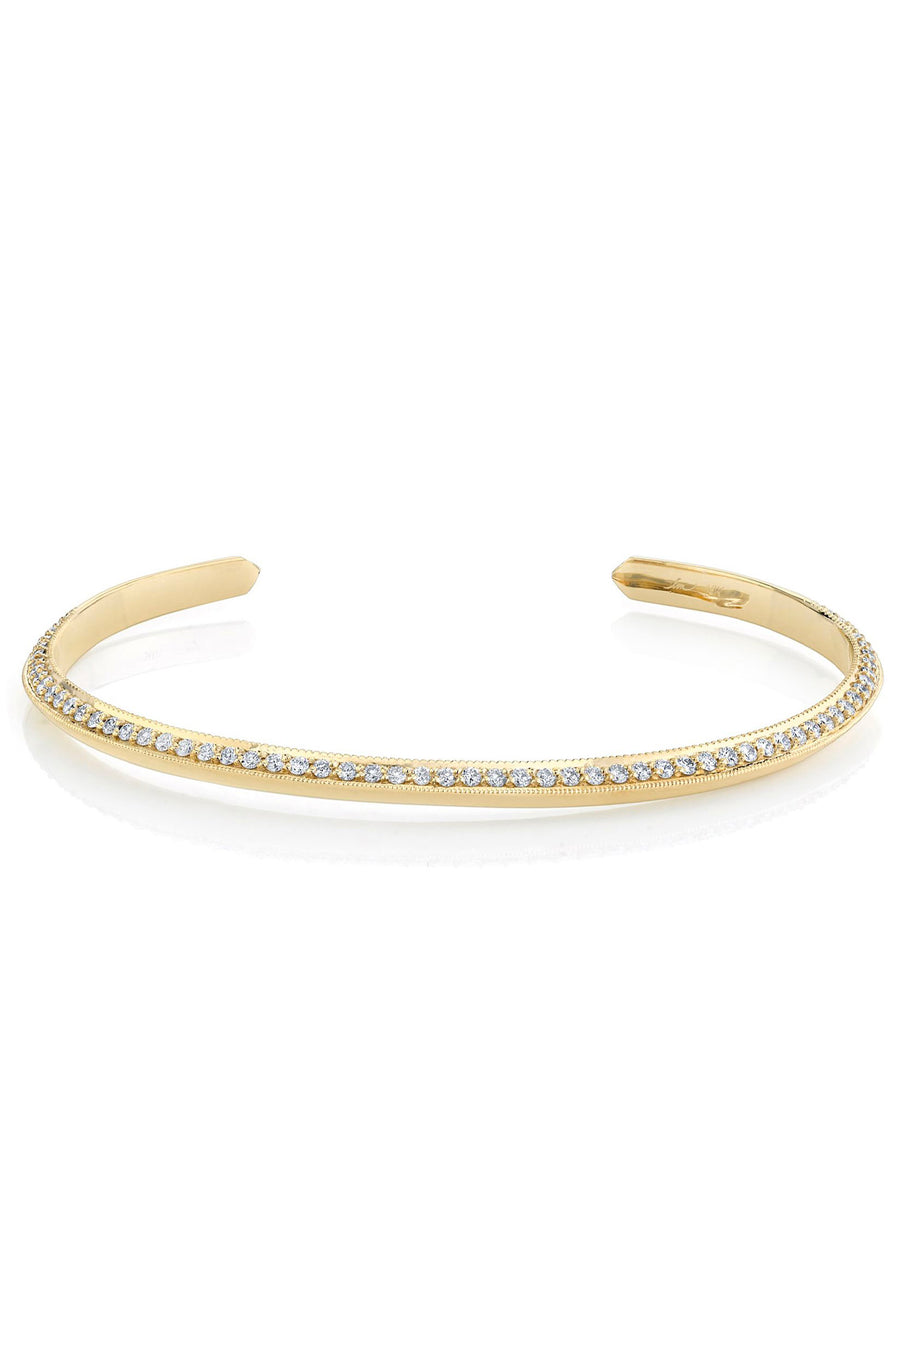 Single Sided Pave Knife Edge Cuff - 18K Yellow Gold